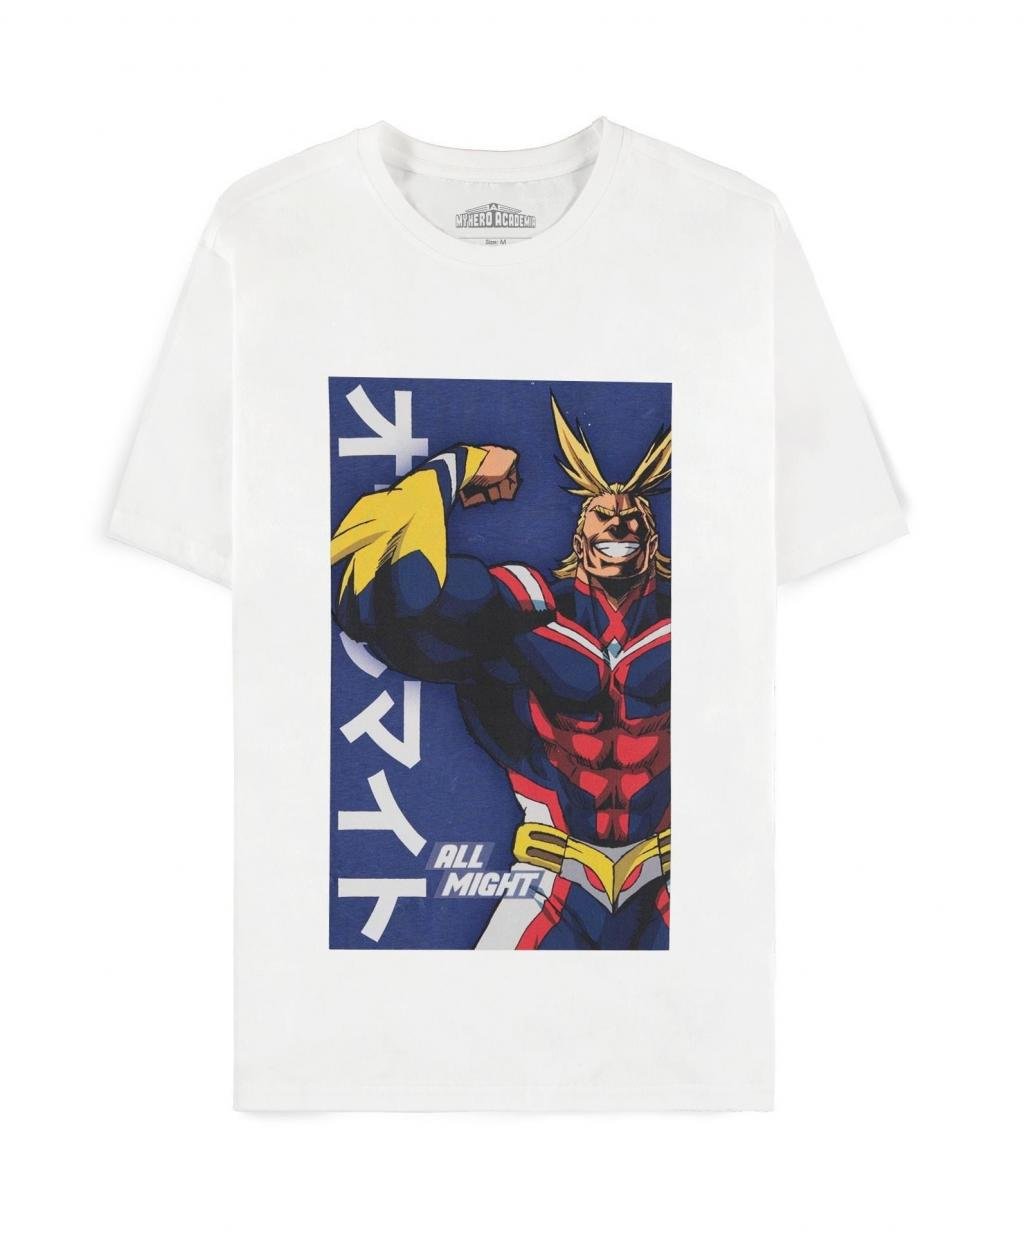 MY HERO ACADEMIA - All Might - T-Shirt Homme (M)